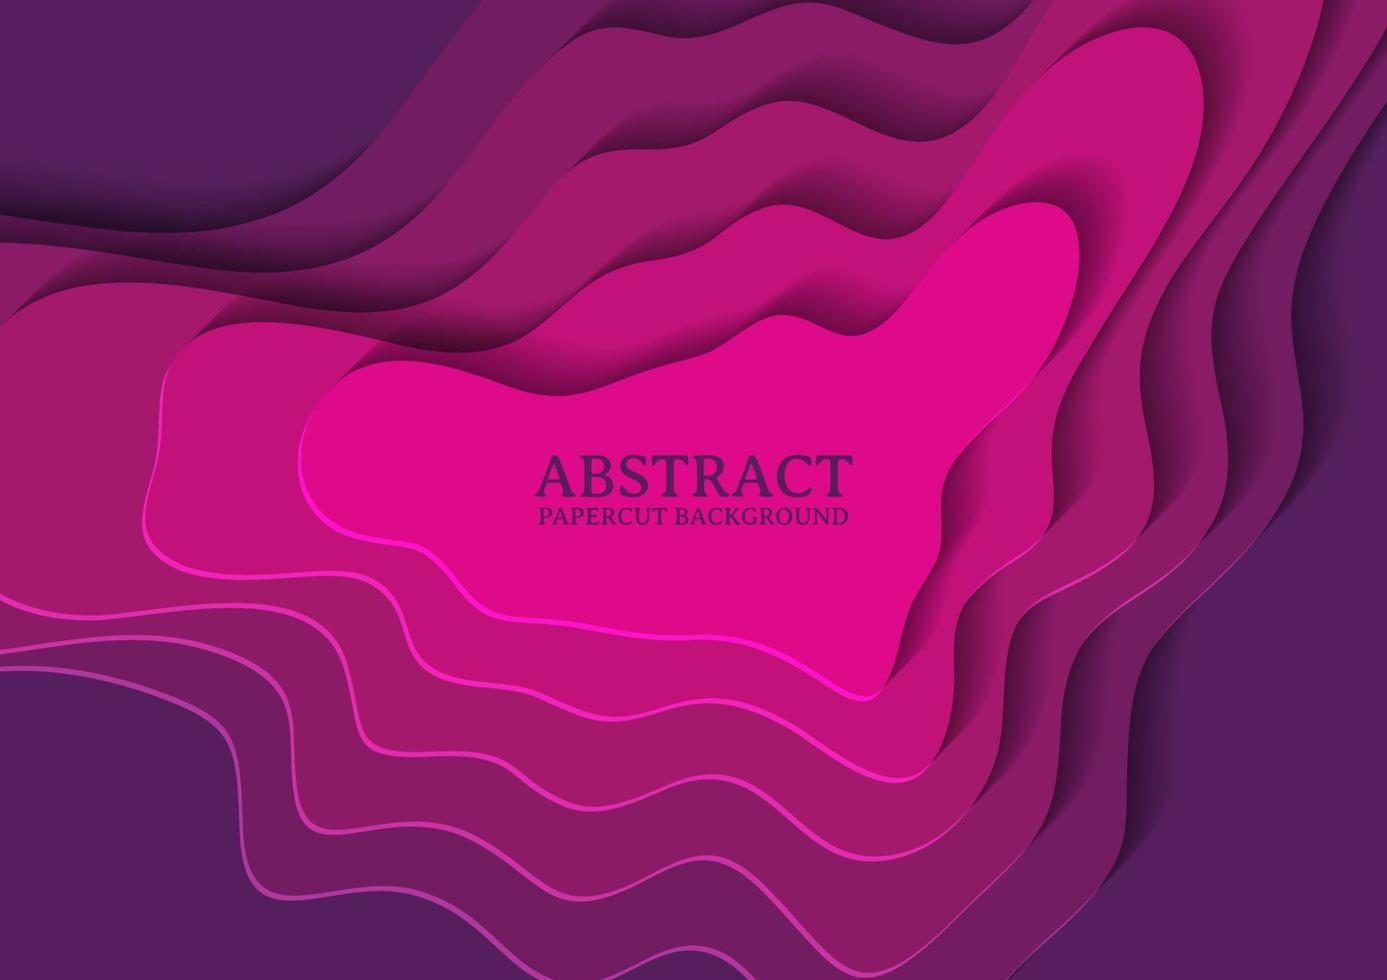 abstract papercut design background with overlap layer vector